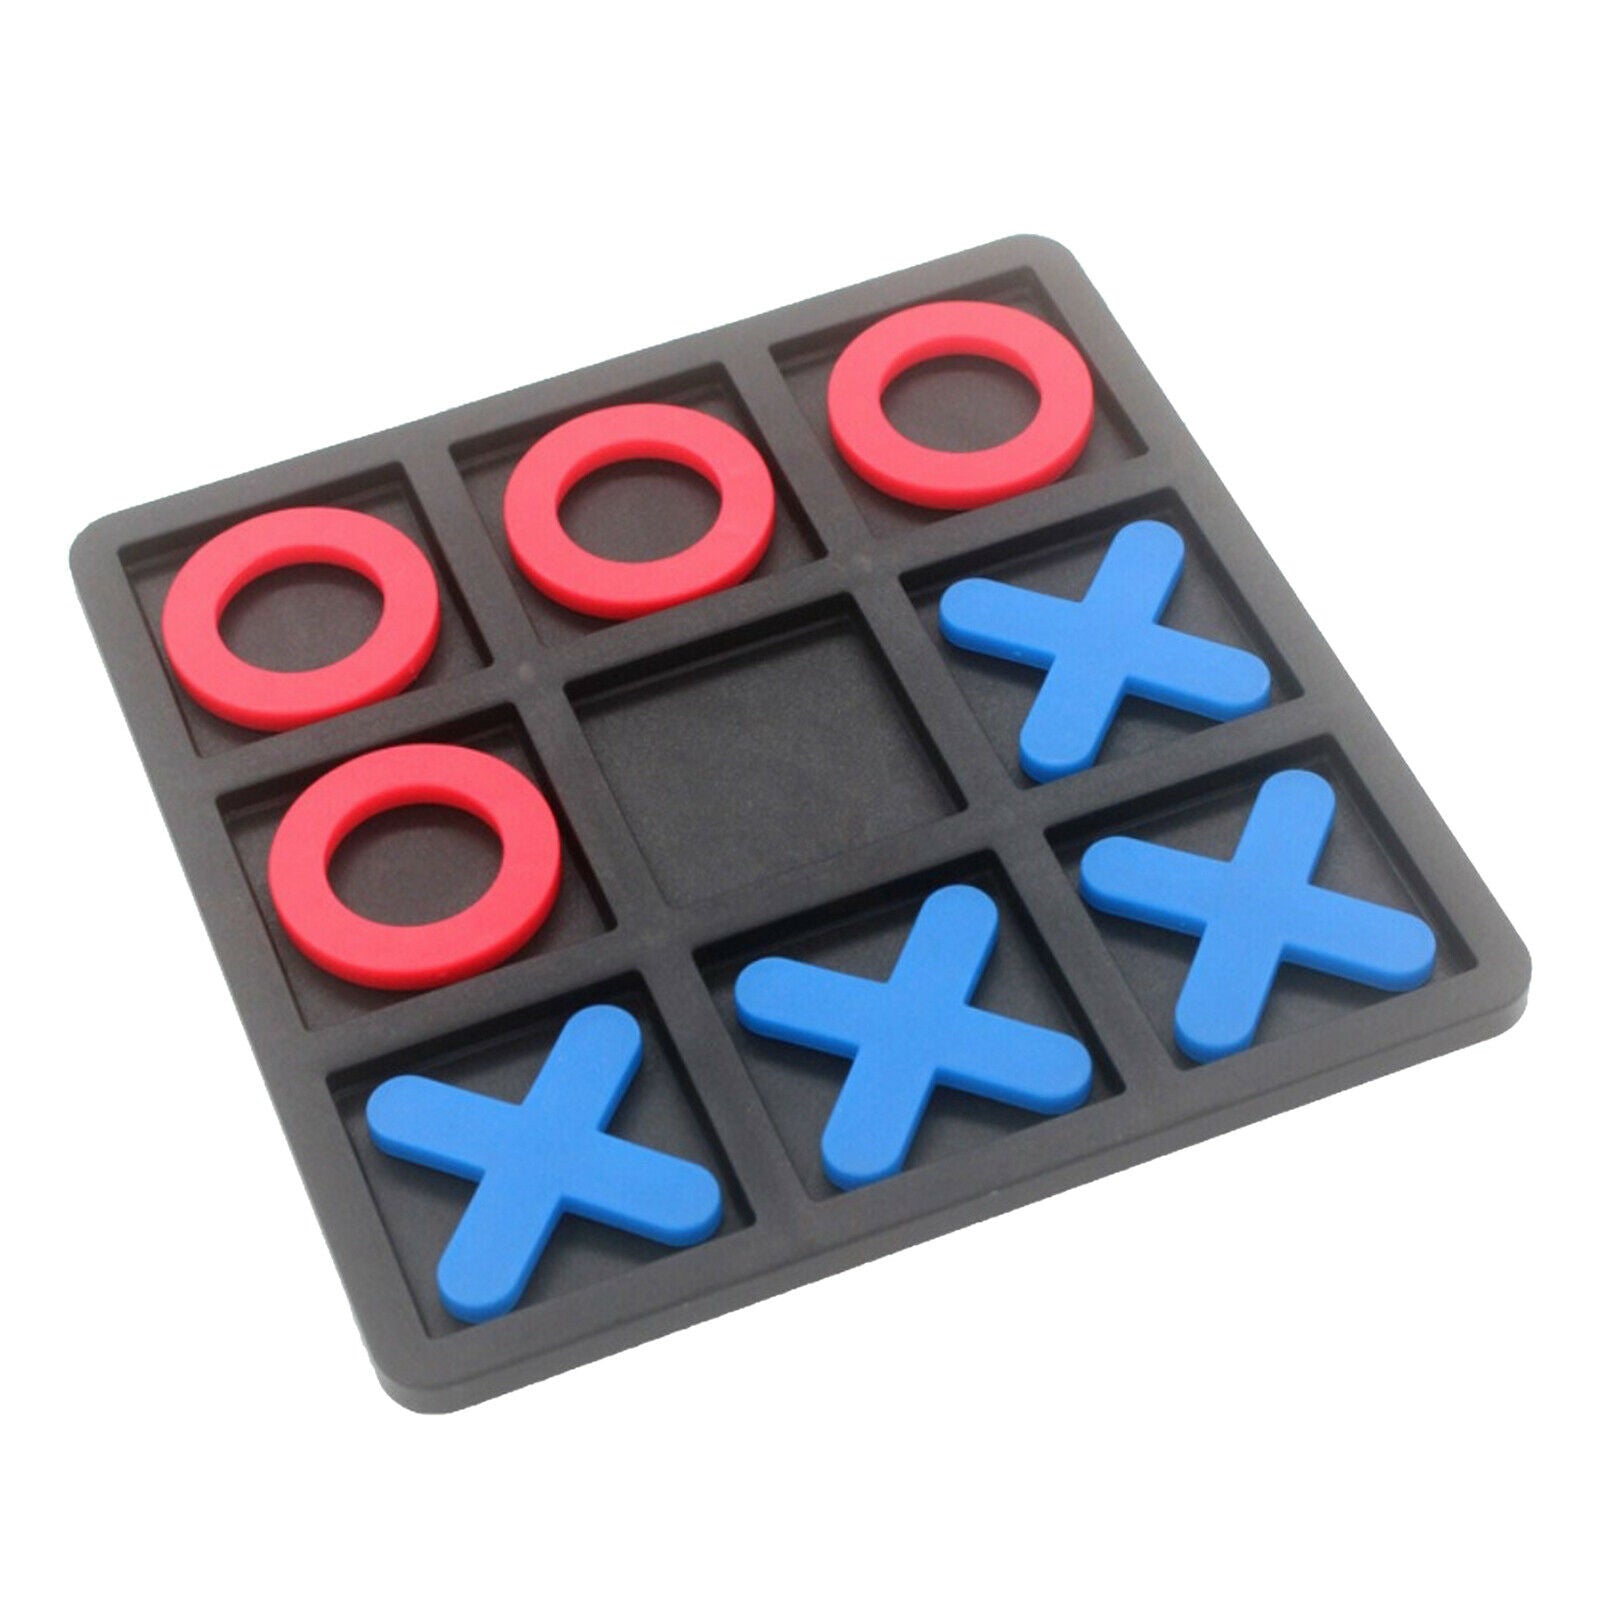 Tic Tac Toe Game Travel Education Puzzle Board for Kids Family Party Interaction